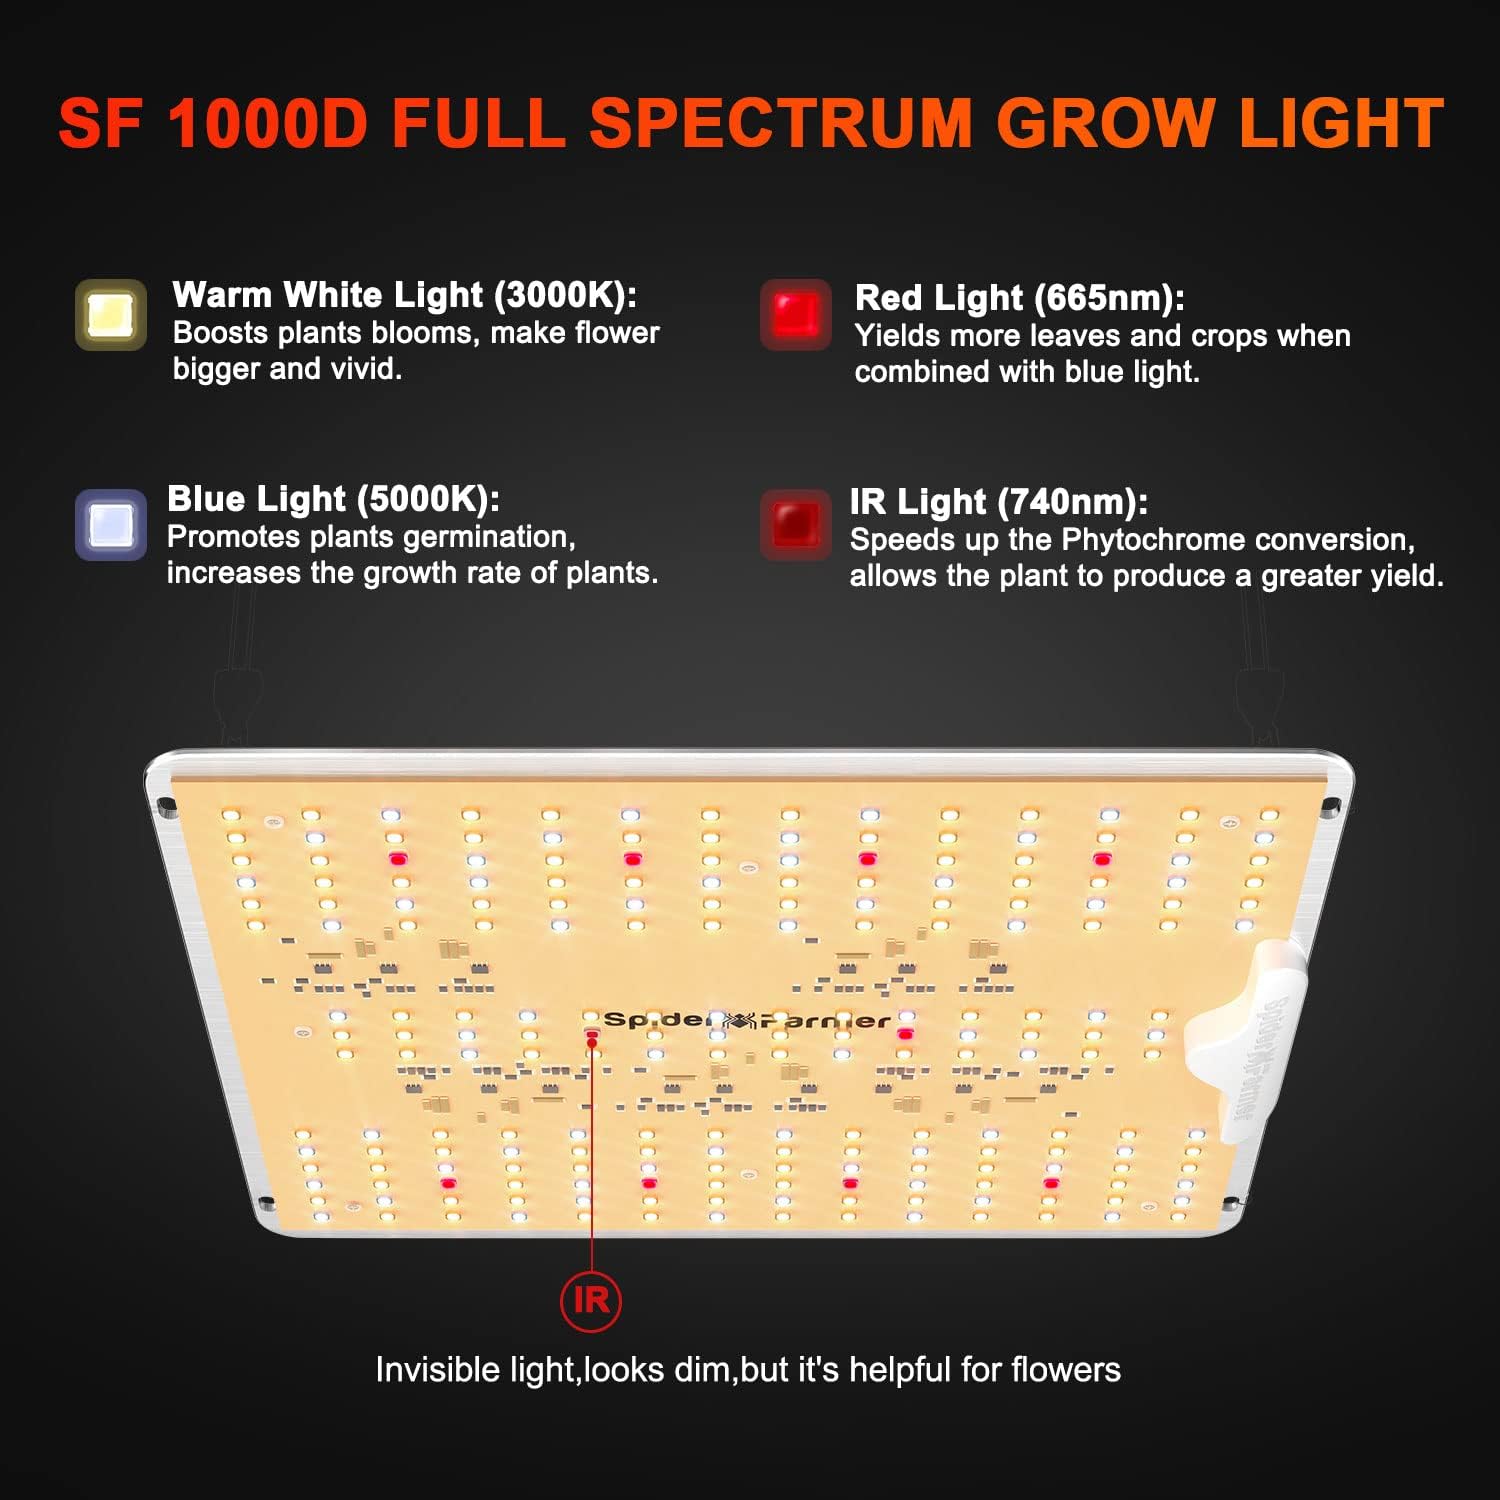 Spider Farmer SF1000D LED Grow Light with Samsung LM301B Diodes  IR Lighting Full Spectrum Grow Light for Indoor Plants Veg Bloom Growing Lamps for 3x3/2x4 Grow Tent 2.5g/w 2 Pack